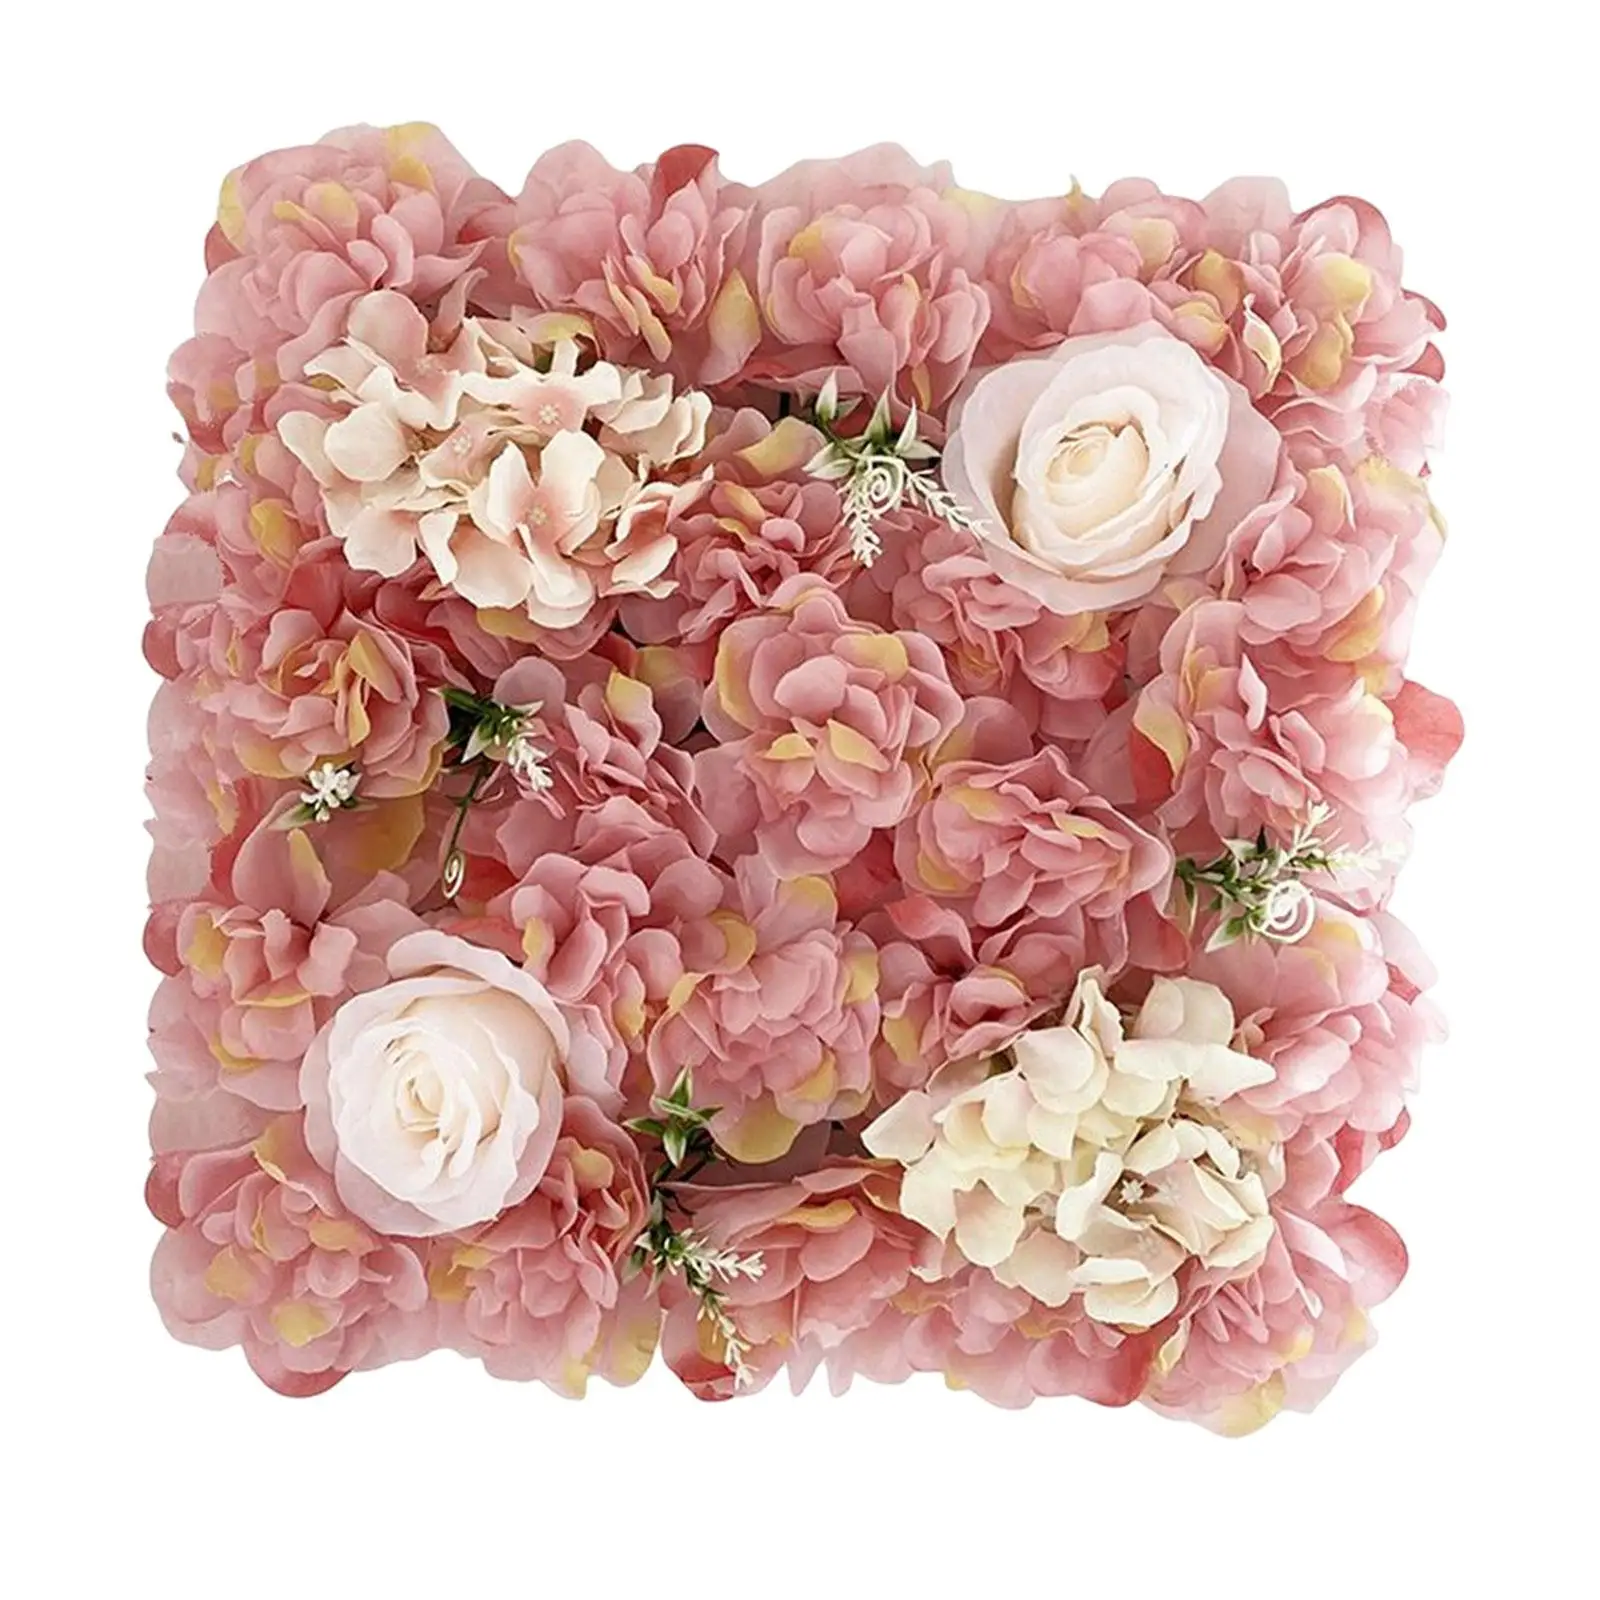 Artificial Flower Wall Panel Flower Arrangements Rose Photo Background for Wedding Party Valentines Day Outdoor Wall Decor